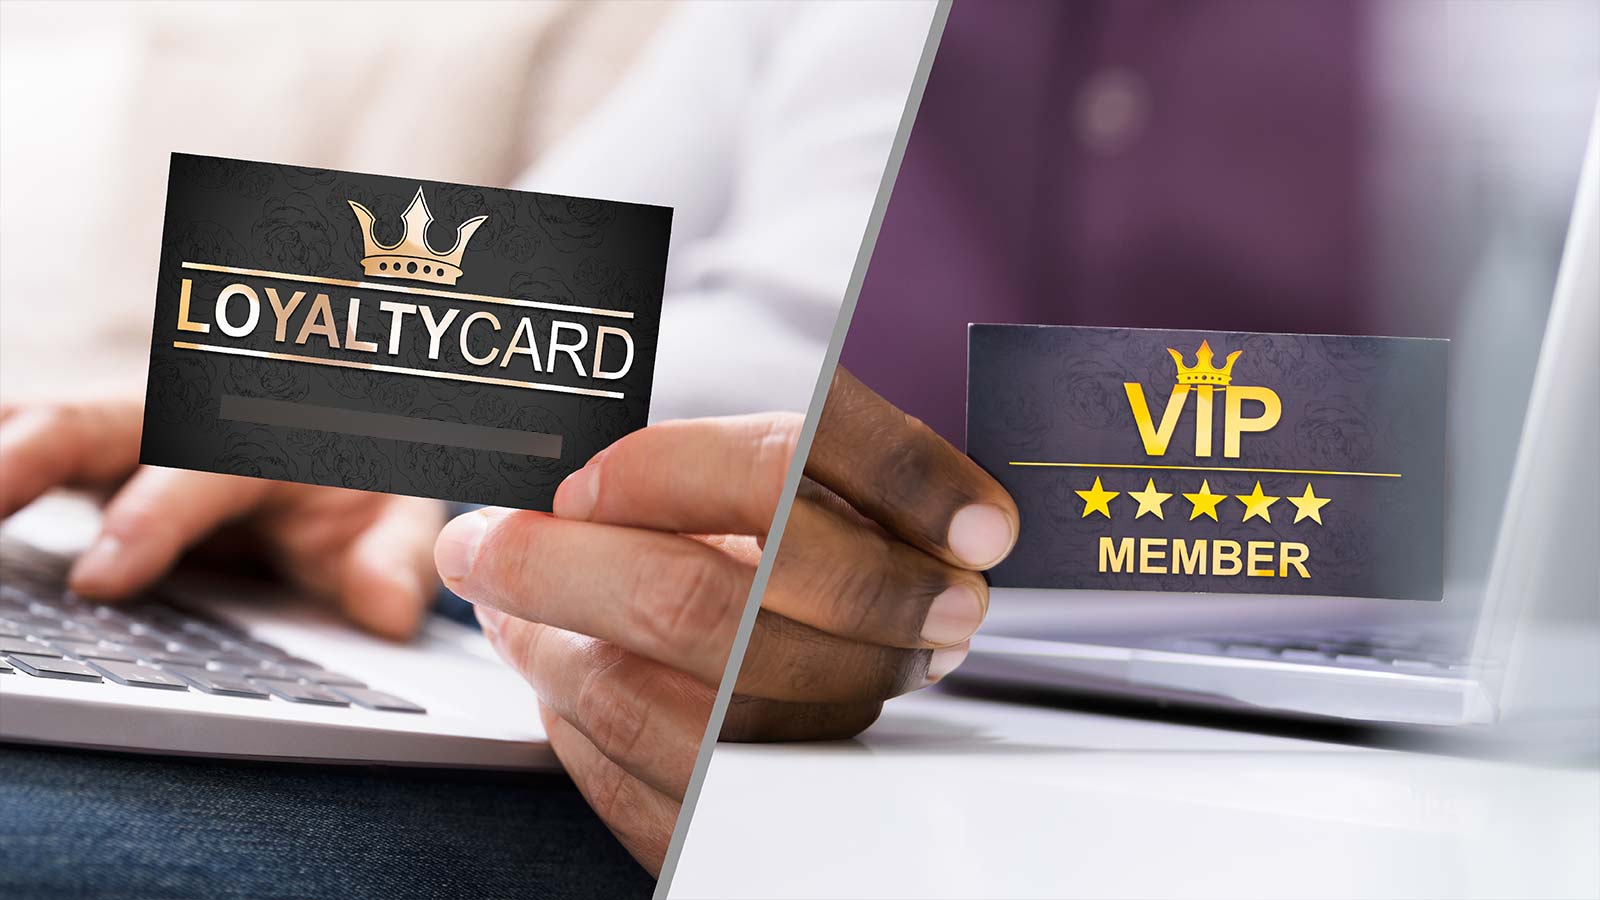 Vip versus loyalty programs - is there any difference